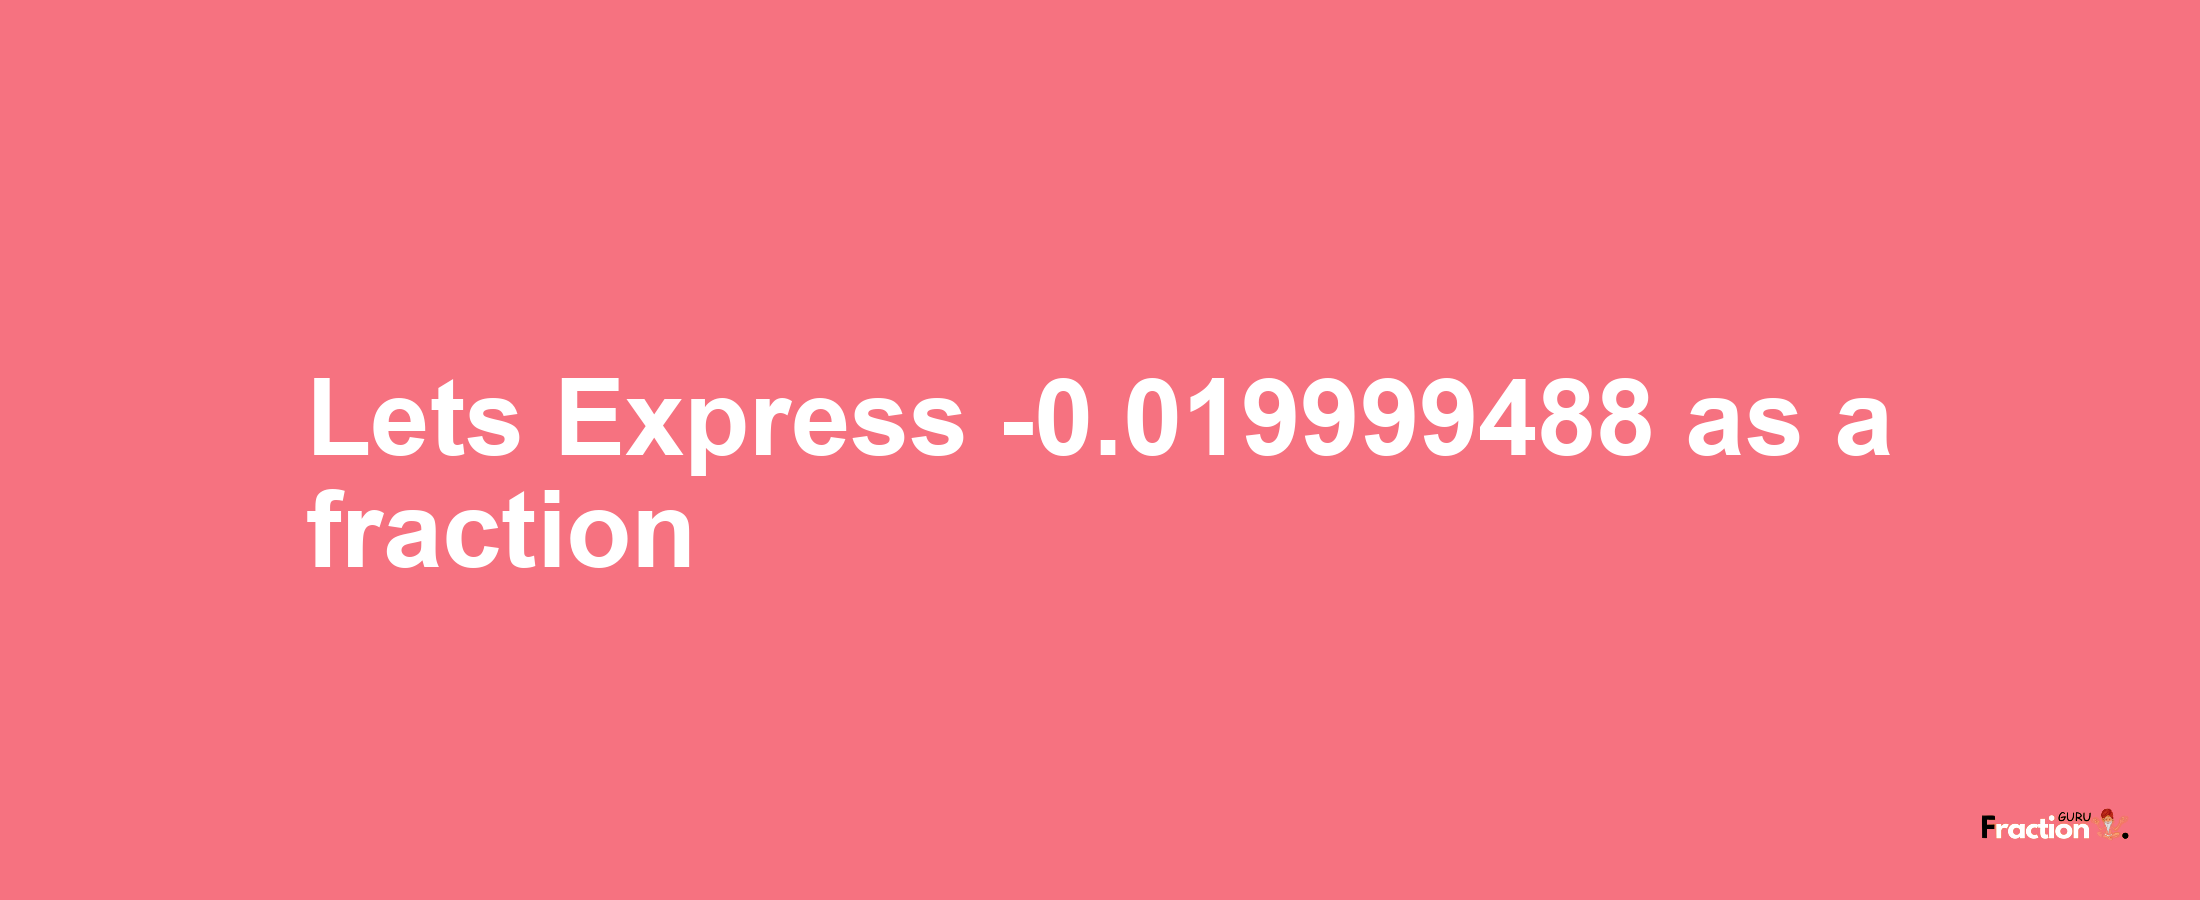 Lets Express -0.019999488 as afraction